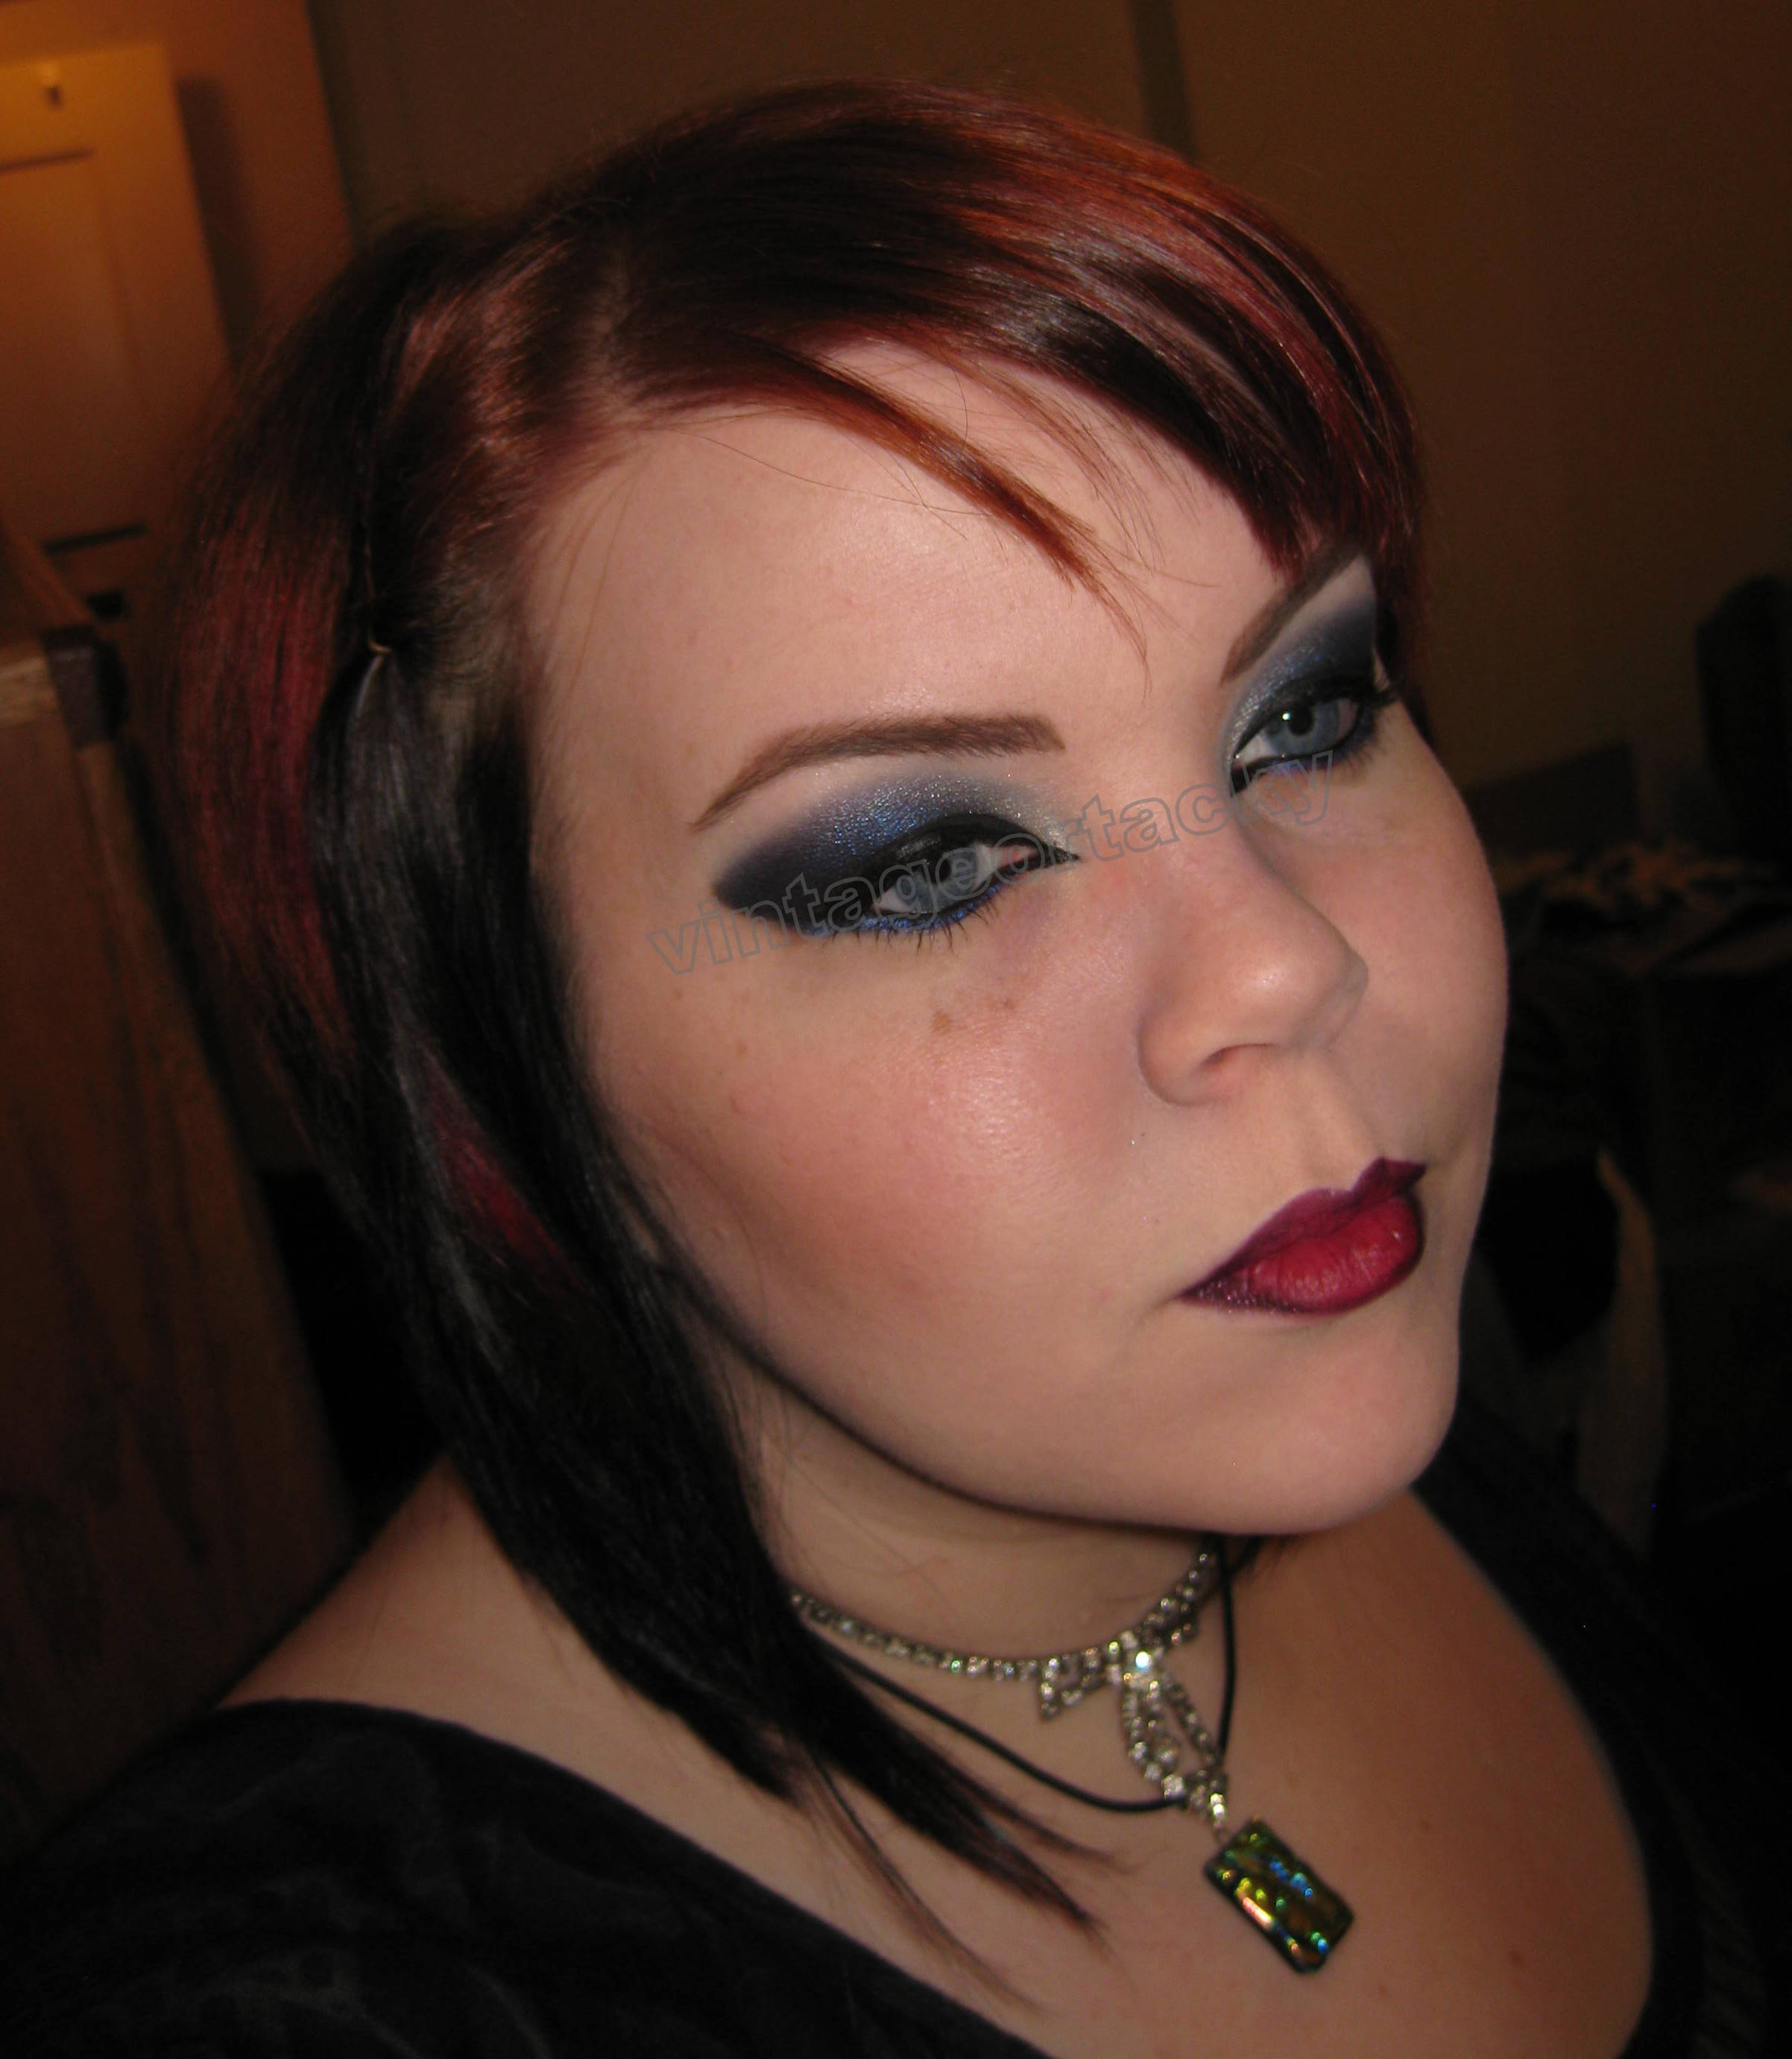 Kat+von+d+face Share kat th, does kat Show that immigration had added to